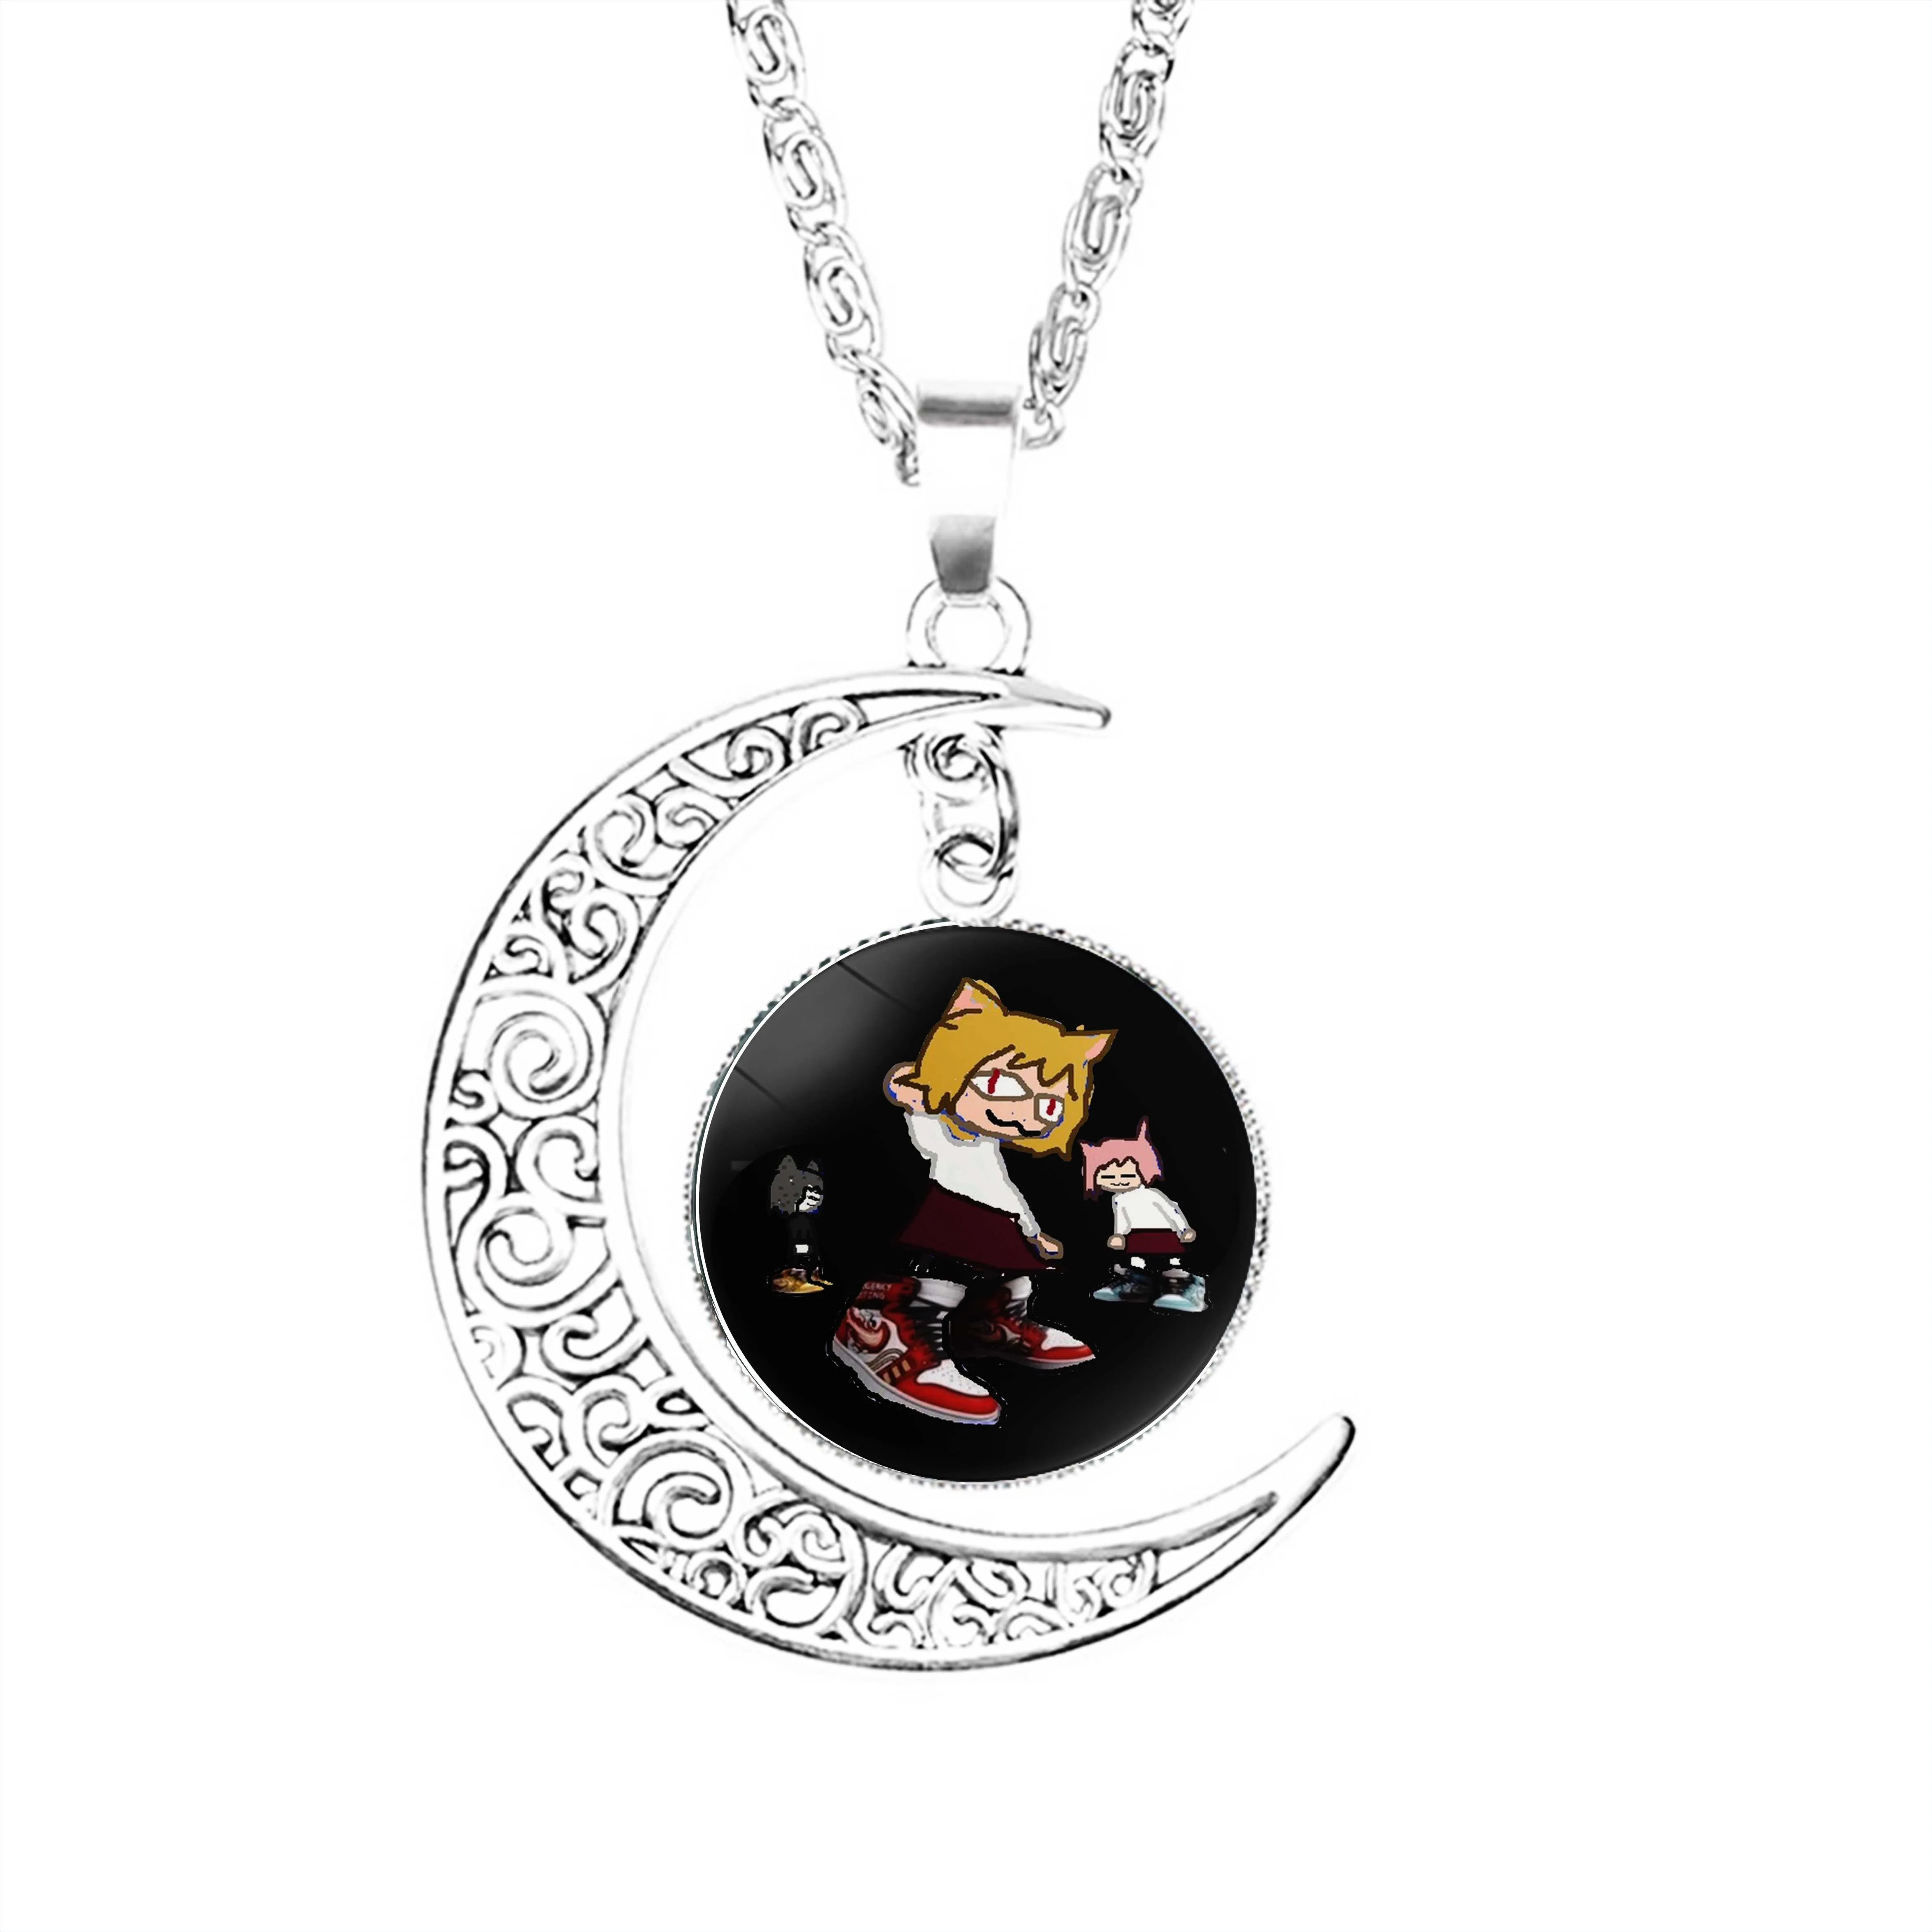 Neco Arc Drip  Moon Necklace Fashion Stainless Steel Lovers Boy Jewelry Chain Lady Charm Crescent Men Pendant Gifts Women